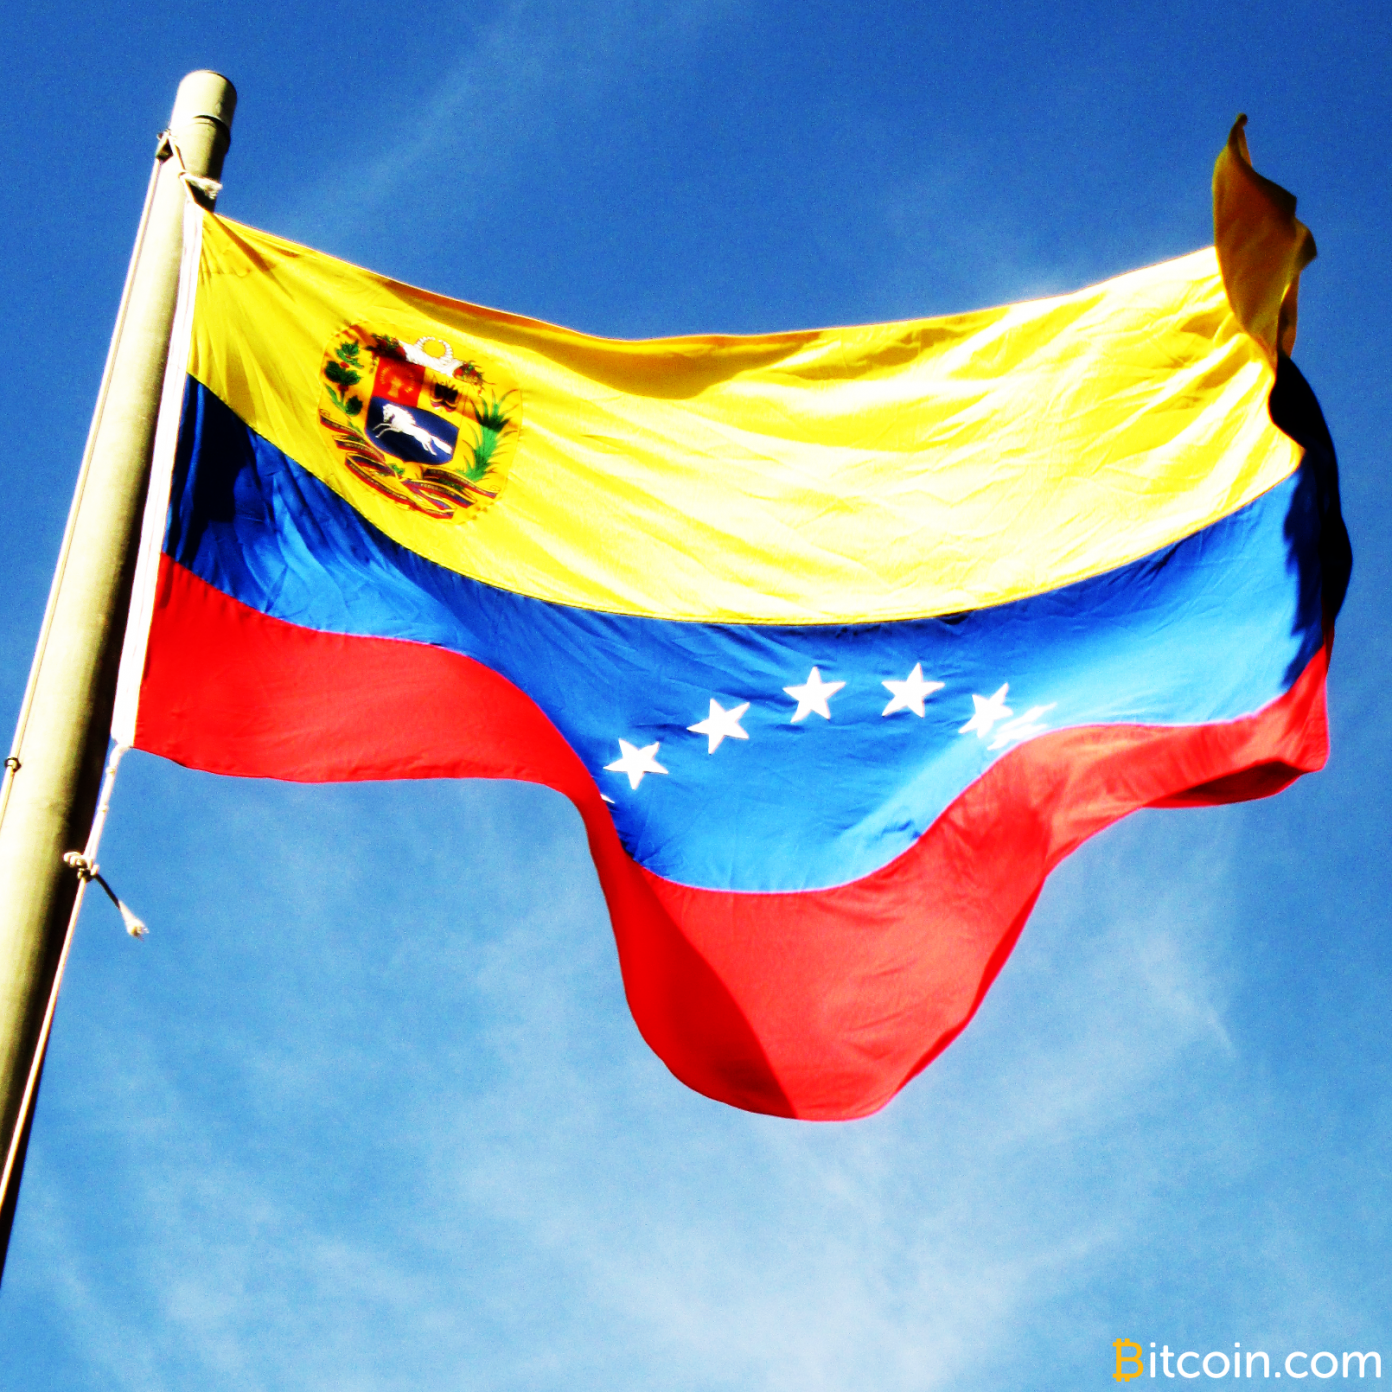 Venezuela Found Foreign Investors for Petro Cryptocurrency Pre-Sale Starting This Month